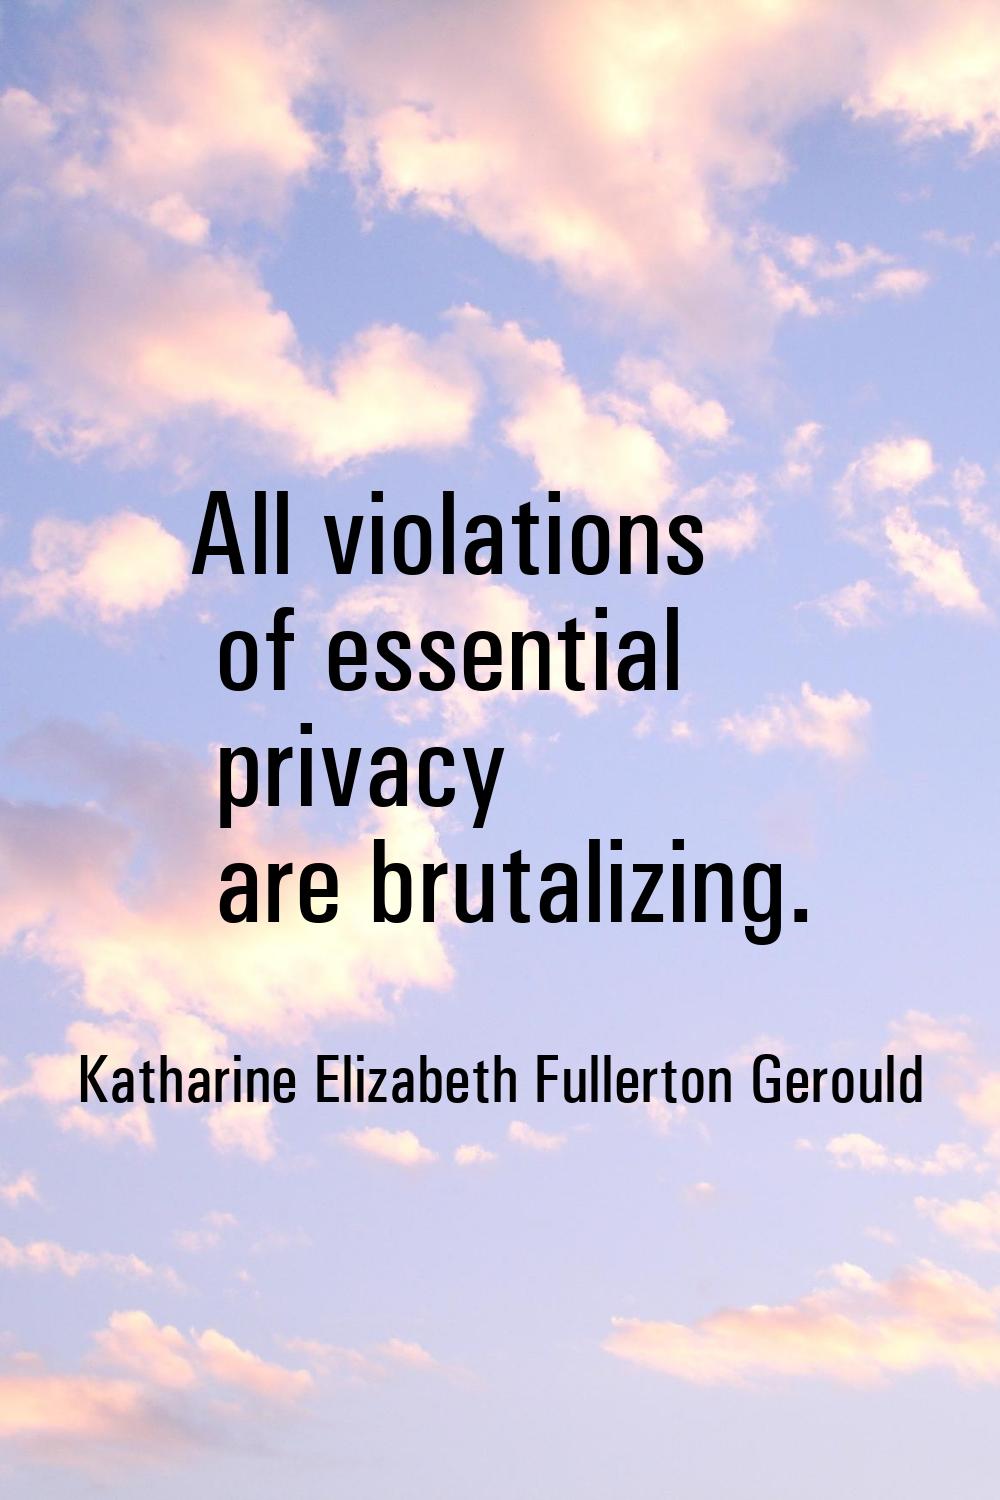 All violations of essential privacy are brutalizing.